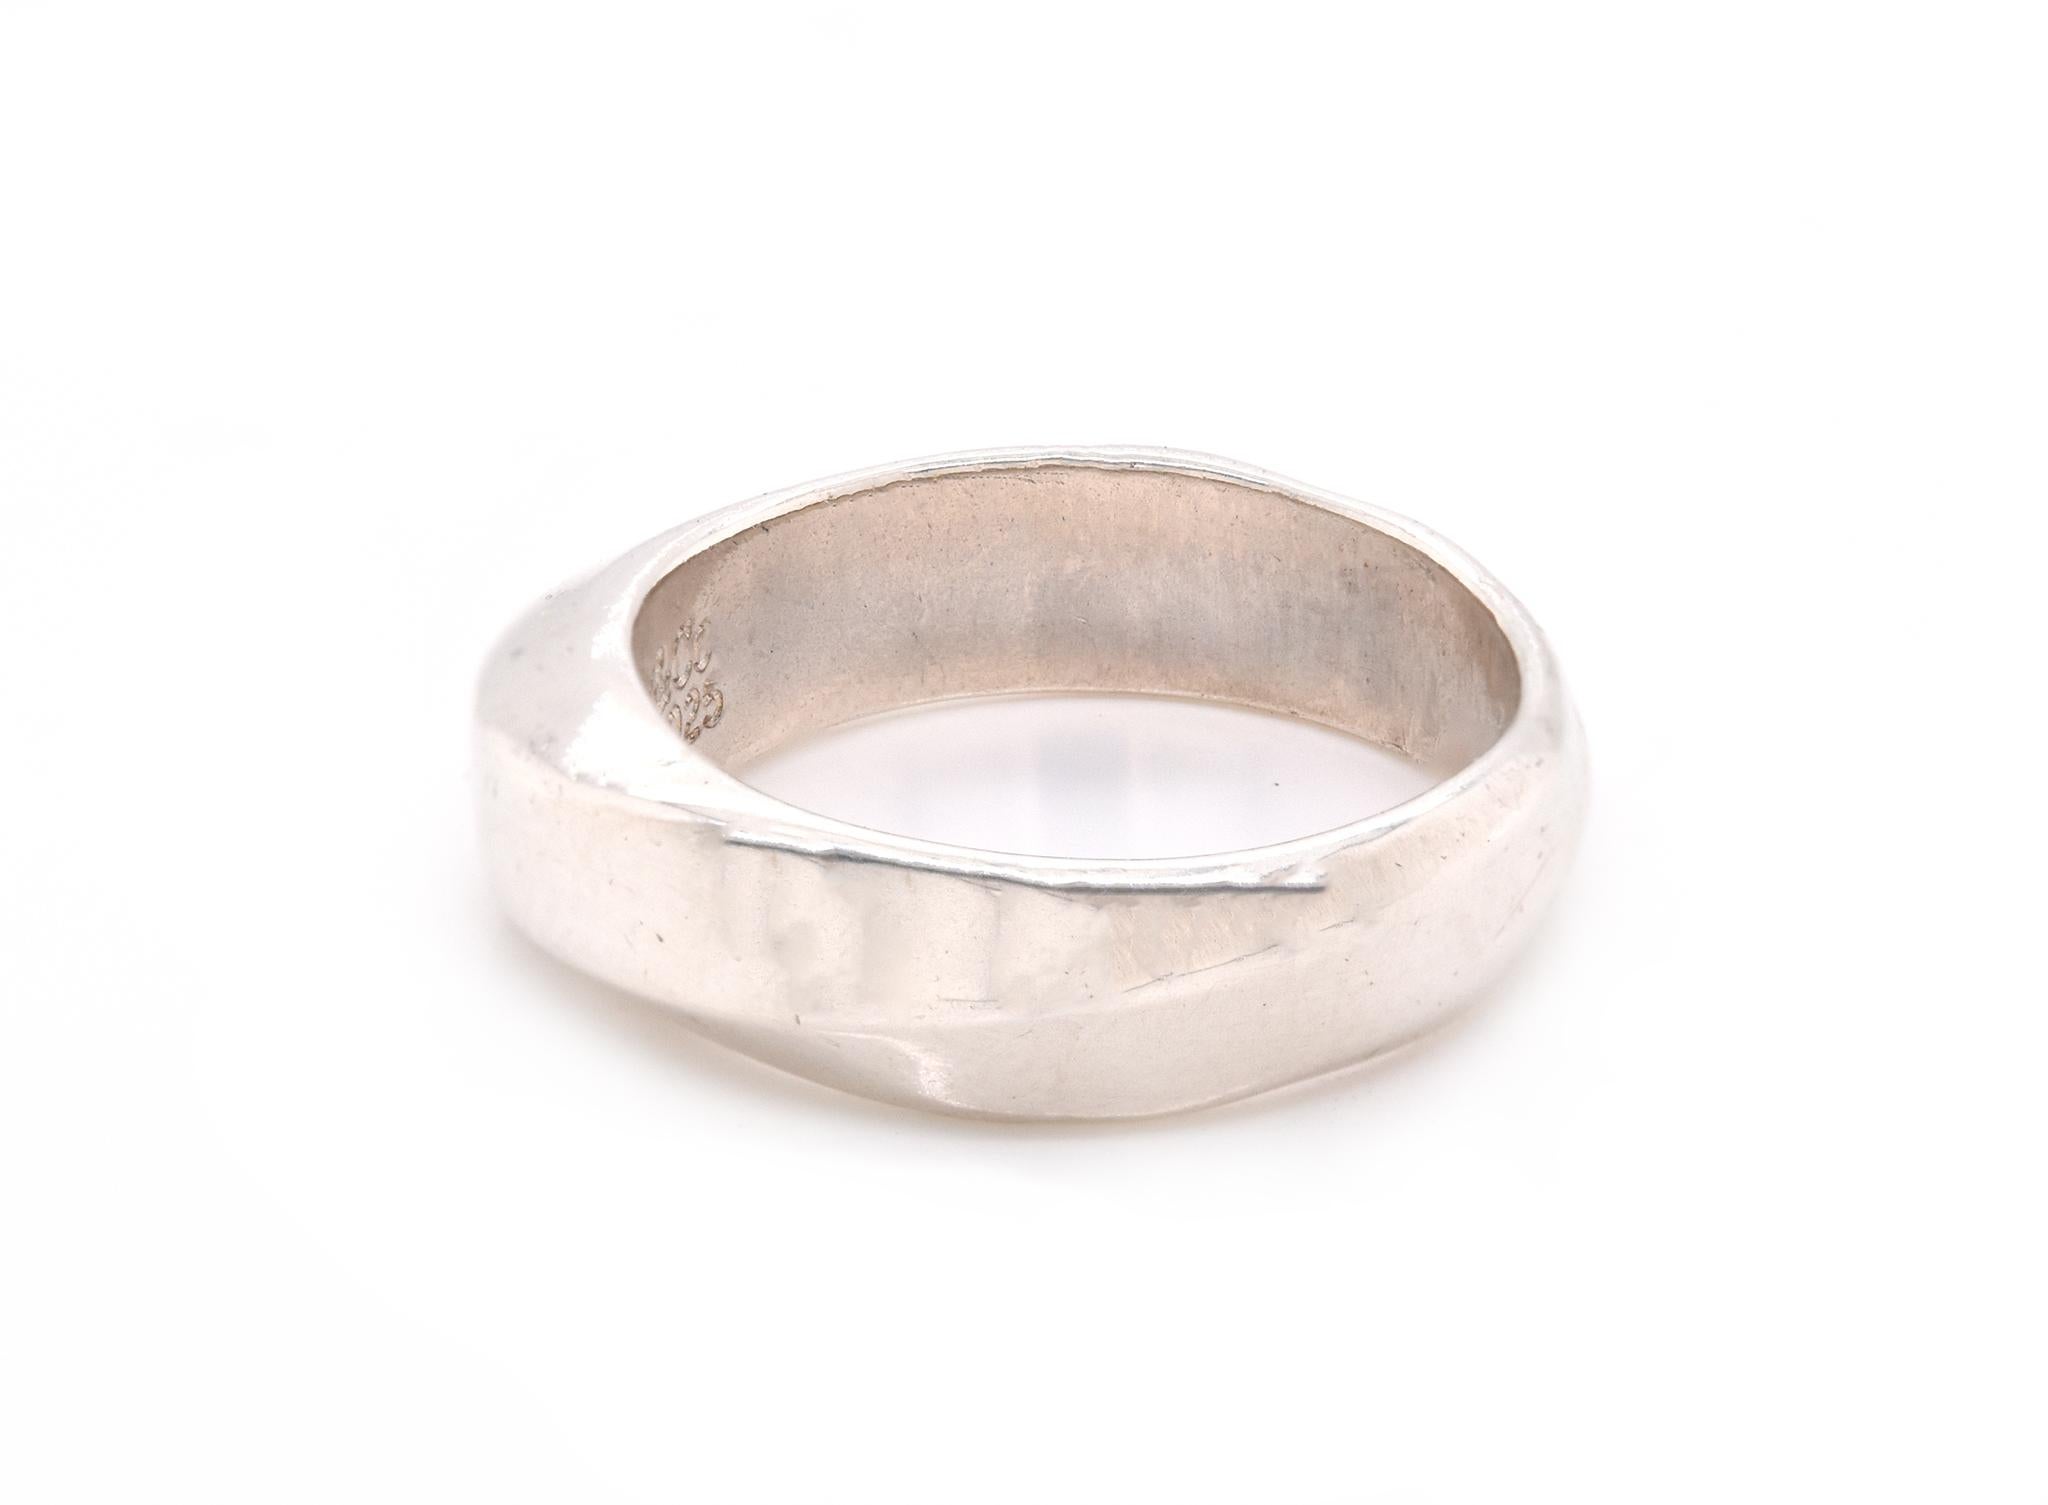 Designer: Tiffany & Co. 
Material: sterling silver
Dimensions: band measures 5.7mm wide
Weight: 4.7 grams
Size: 5.25
